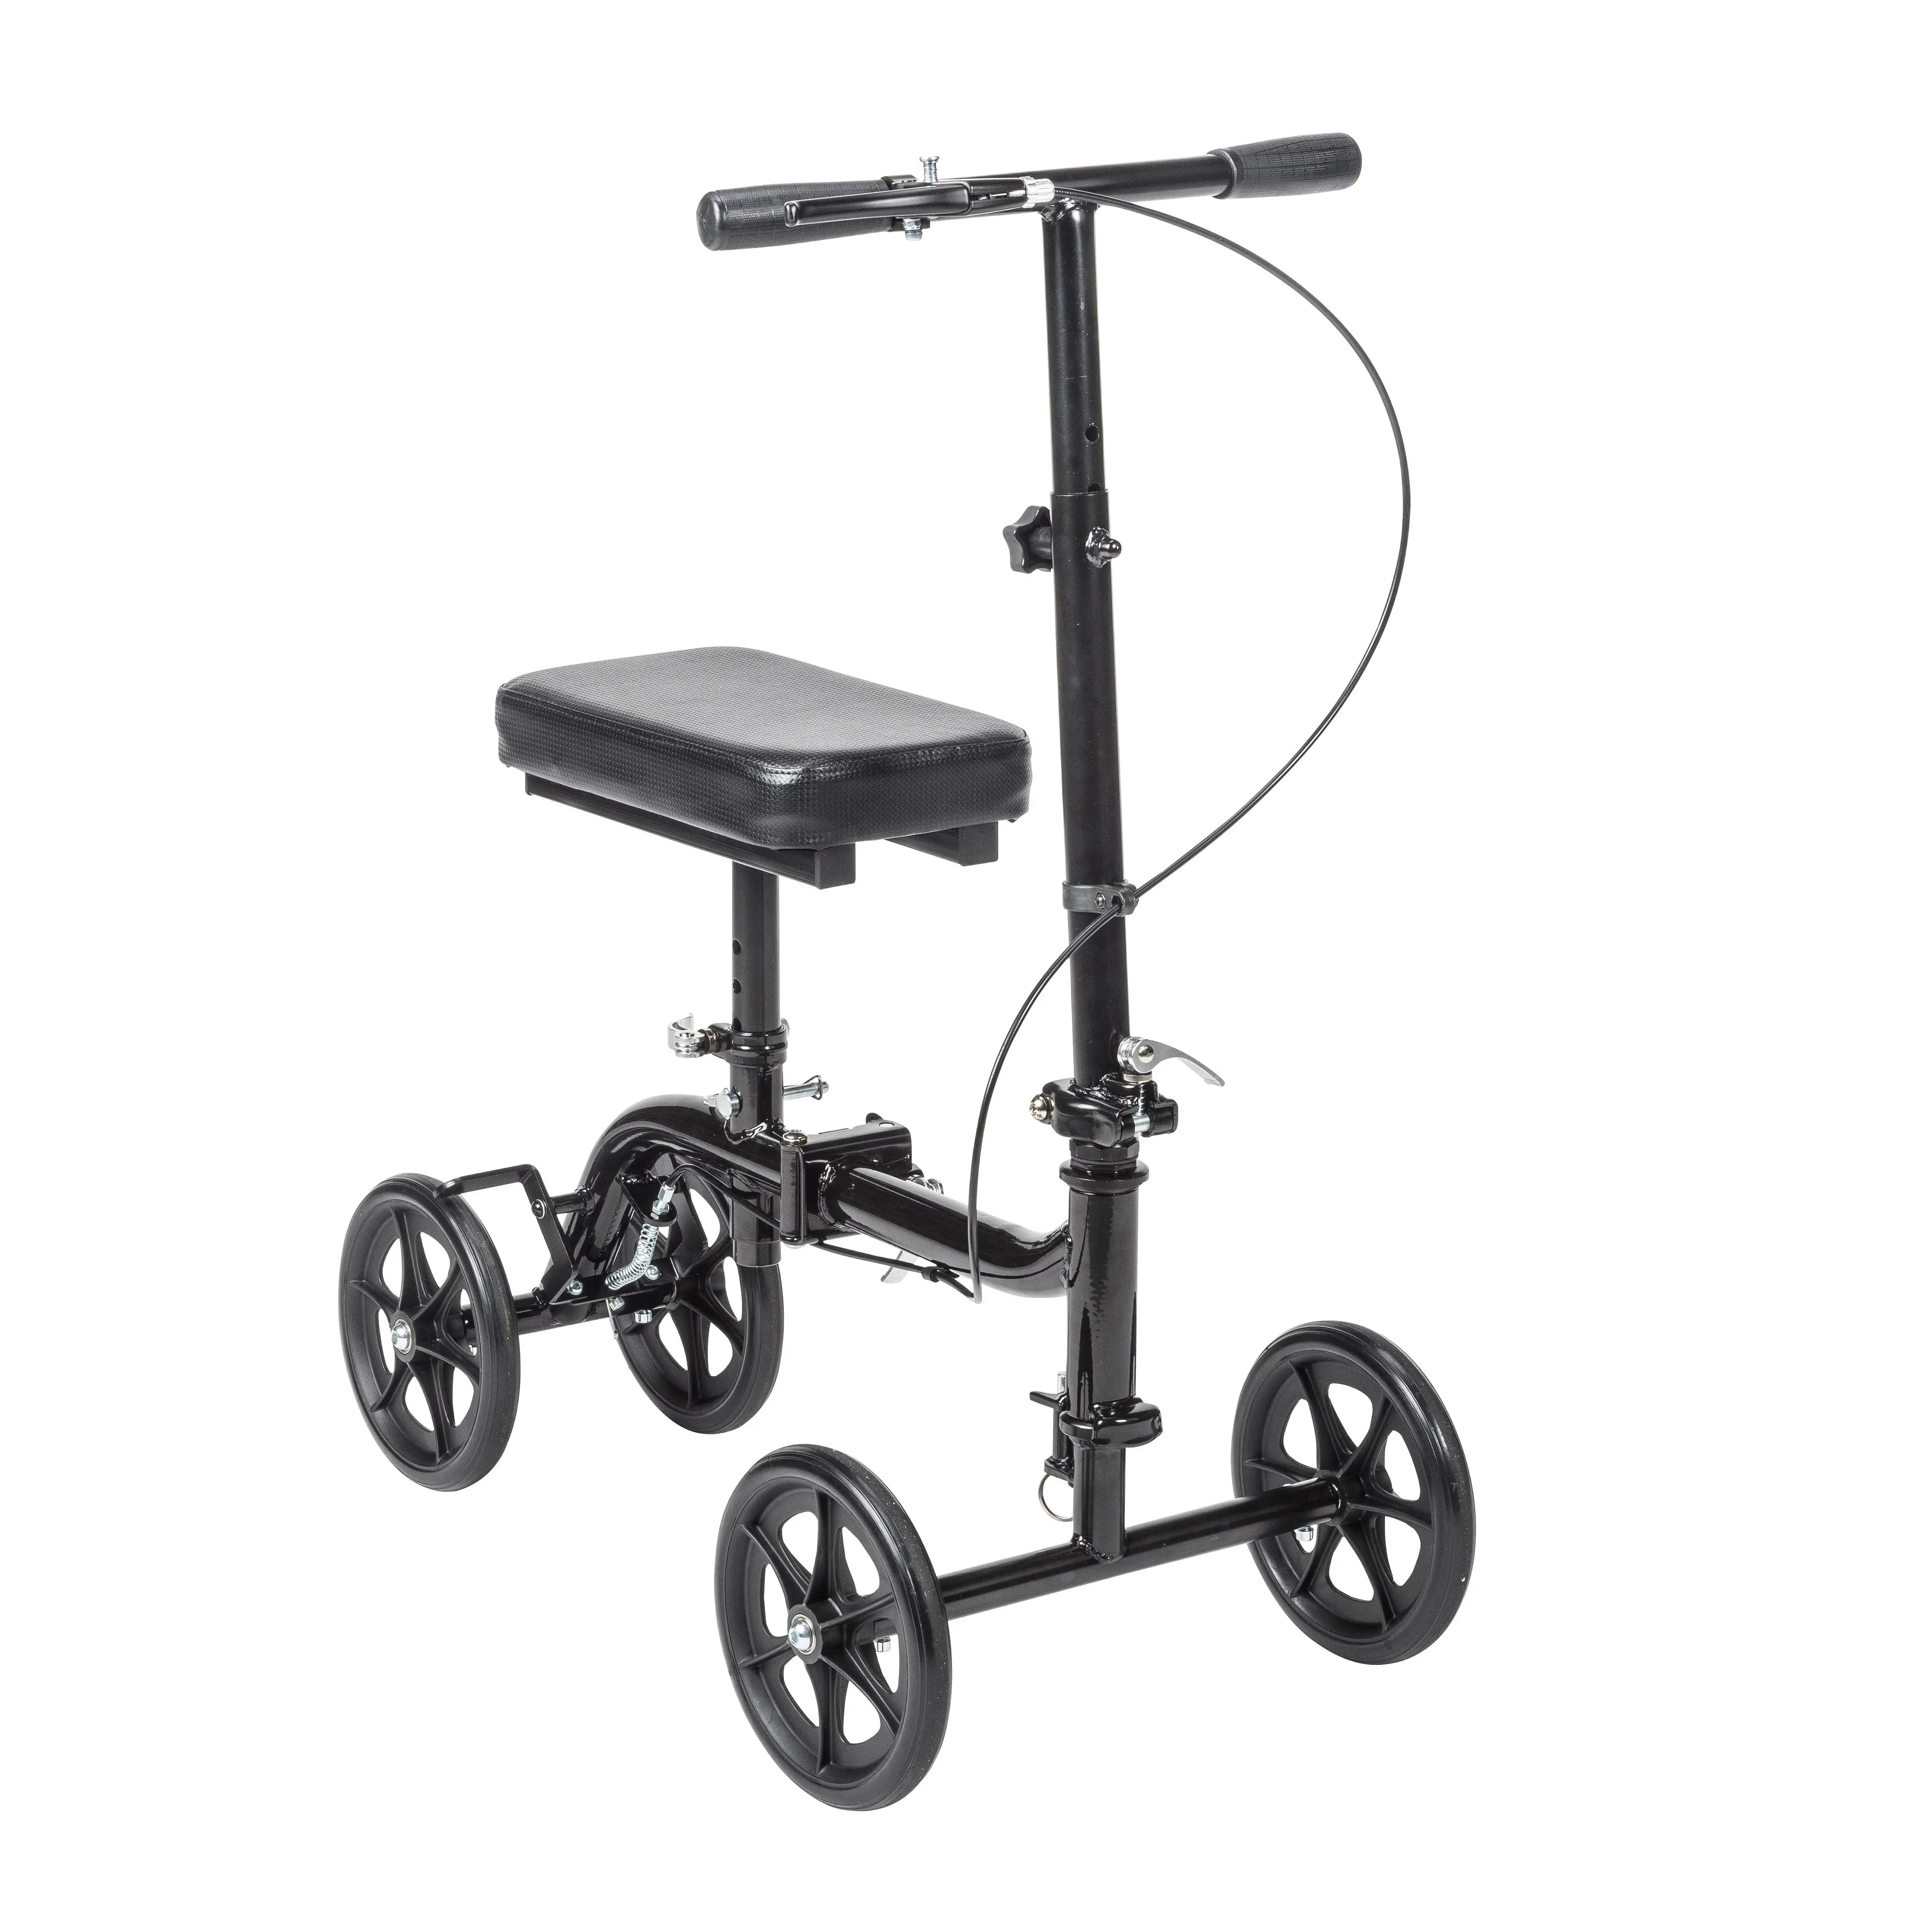 Steerable Folding Knee Walker Knee Scooter, Alternative to Crutches - Home Health Store Inc